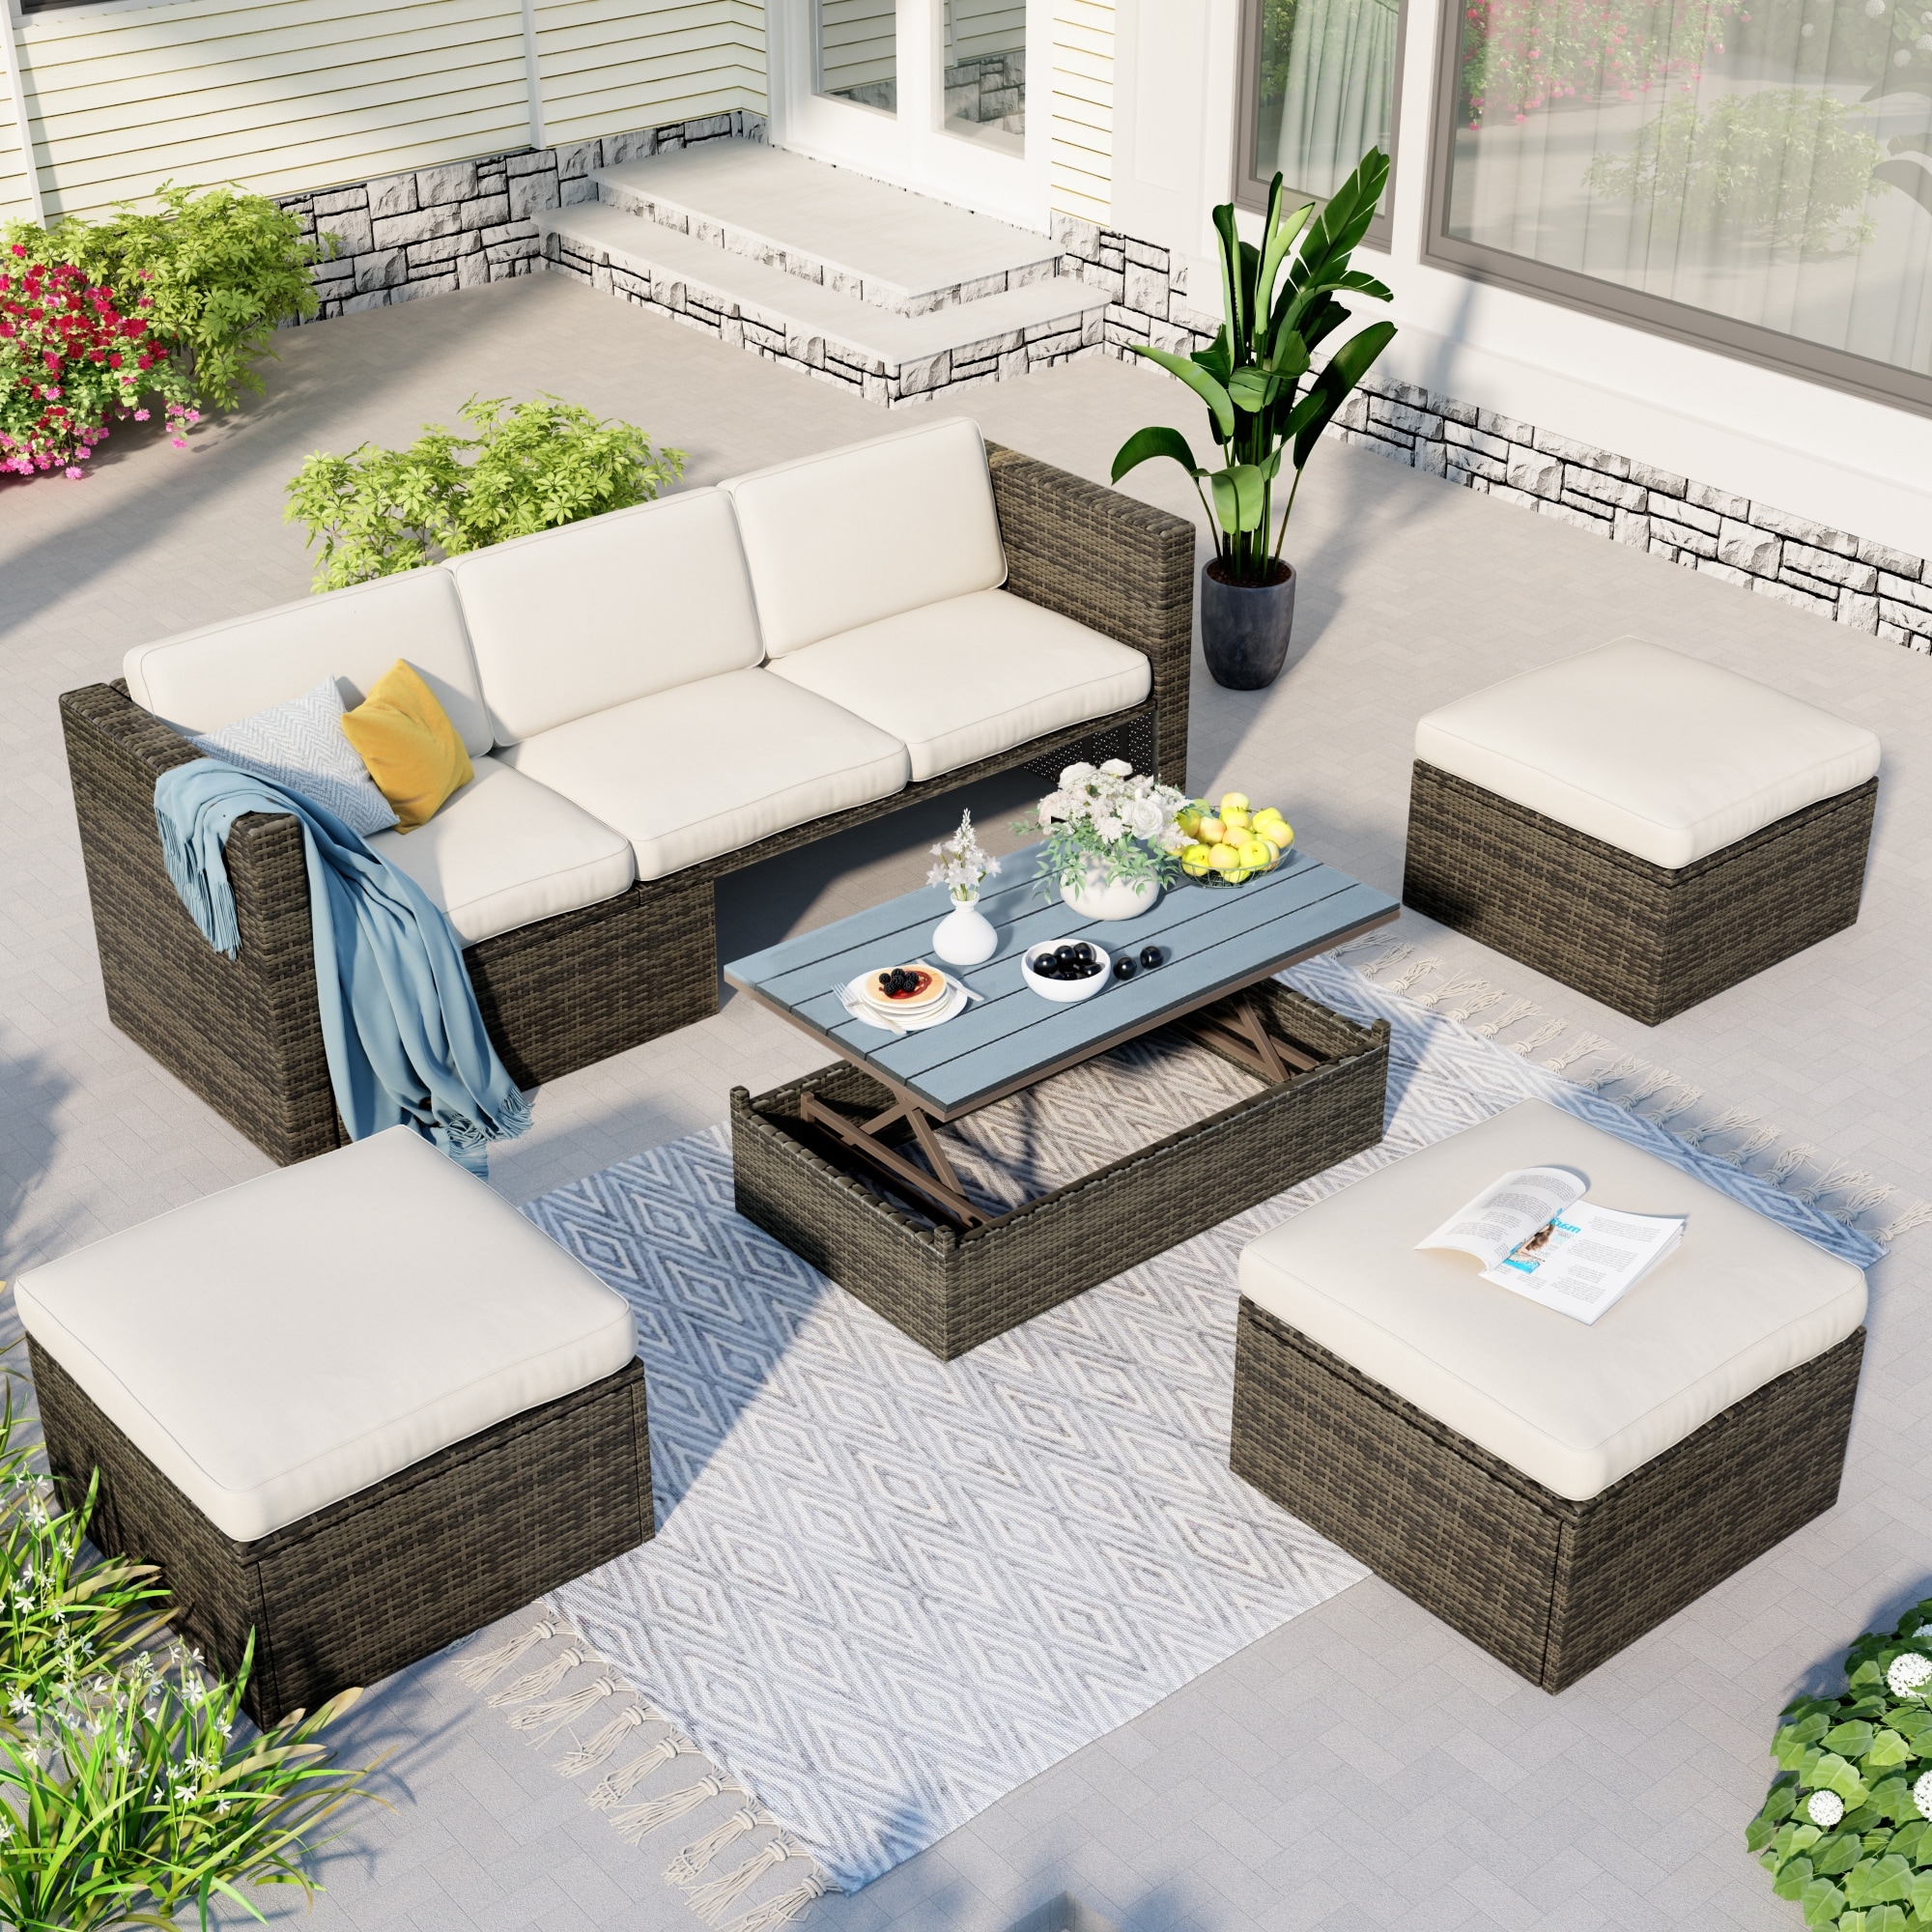 5-pieces Outdoor Garden Patio Furniture Sets For 4-6  Rattan Sofa Sets With Adustable Backrest  Cushions and Lift Top Coffee Table